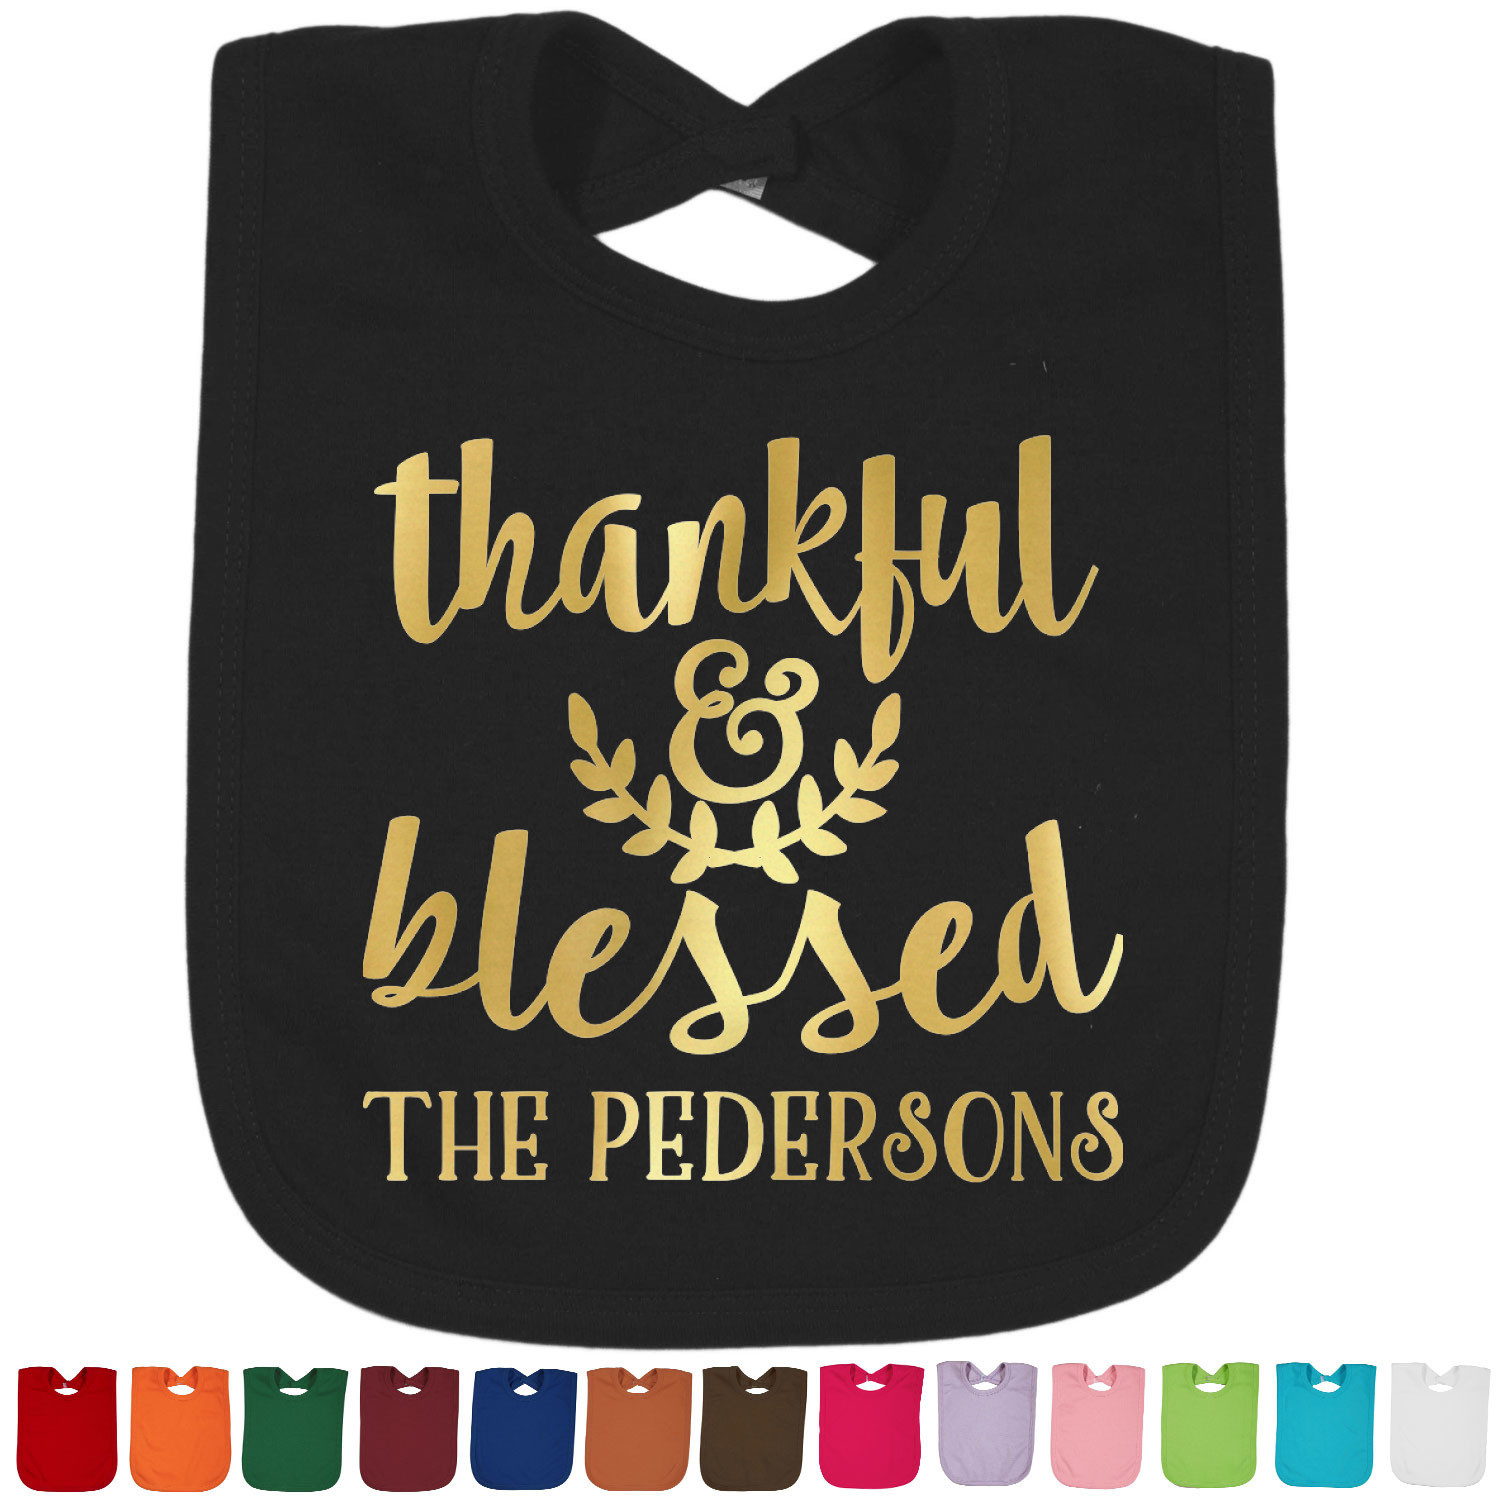 Thanksgiving Quotes Baby
 Thanksgiving Quotes and Sayings Foil Baby Bibs Select